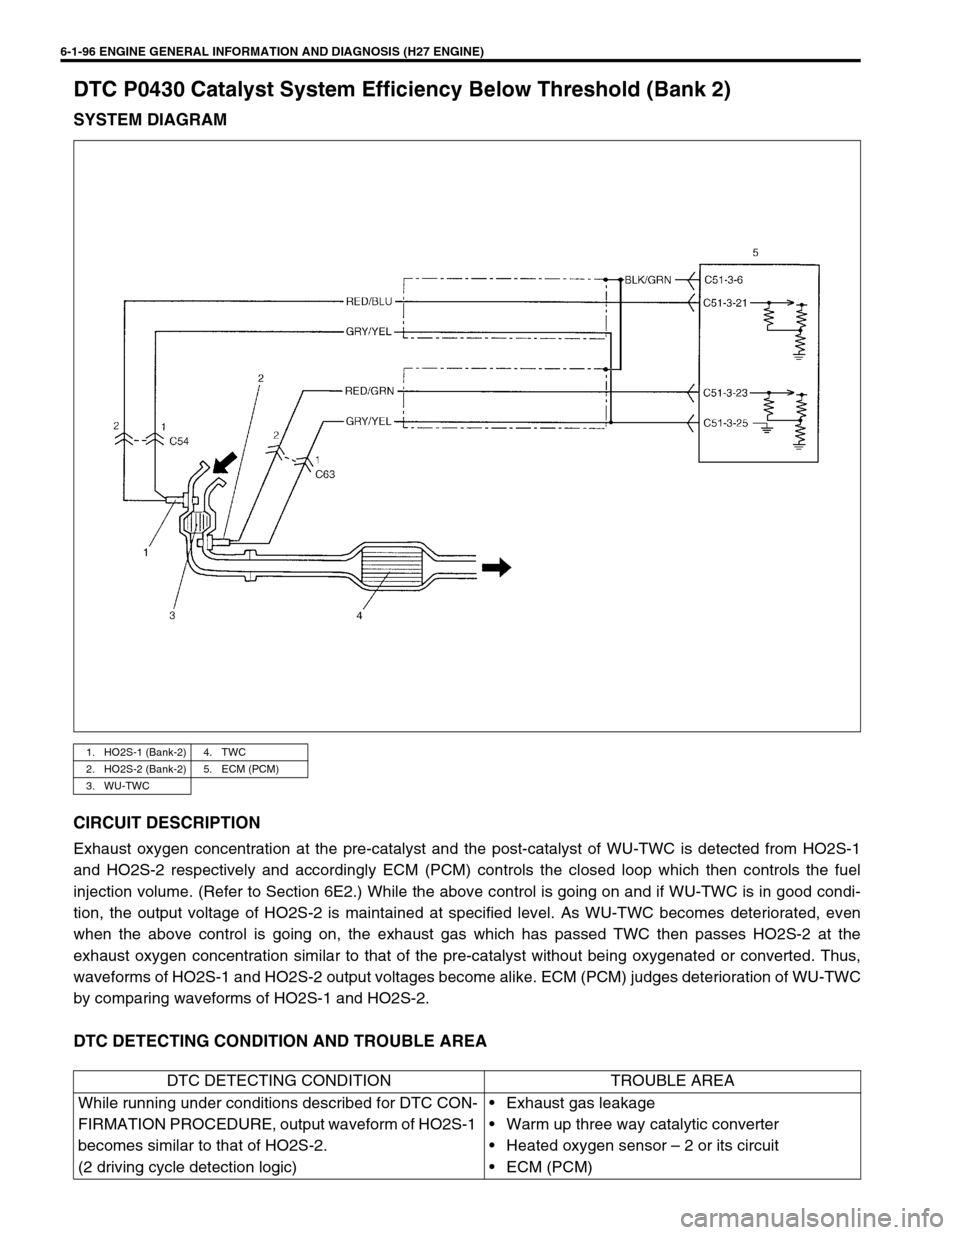 SUZUKI GRAND VITARA 1999 2.G User Guide 6-1-96 ENGINE GENERAL INFORMATION AND DIAGNOSIS (H27 ENGINE)
DTC P0430 Catalyst System Efficiency Below Threshold (Bank 2)
SYSTEM DIAGRAM
CIRCUIT DESCRIPTION
Exhaust oxygen concentration at the pre-ca